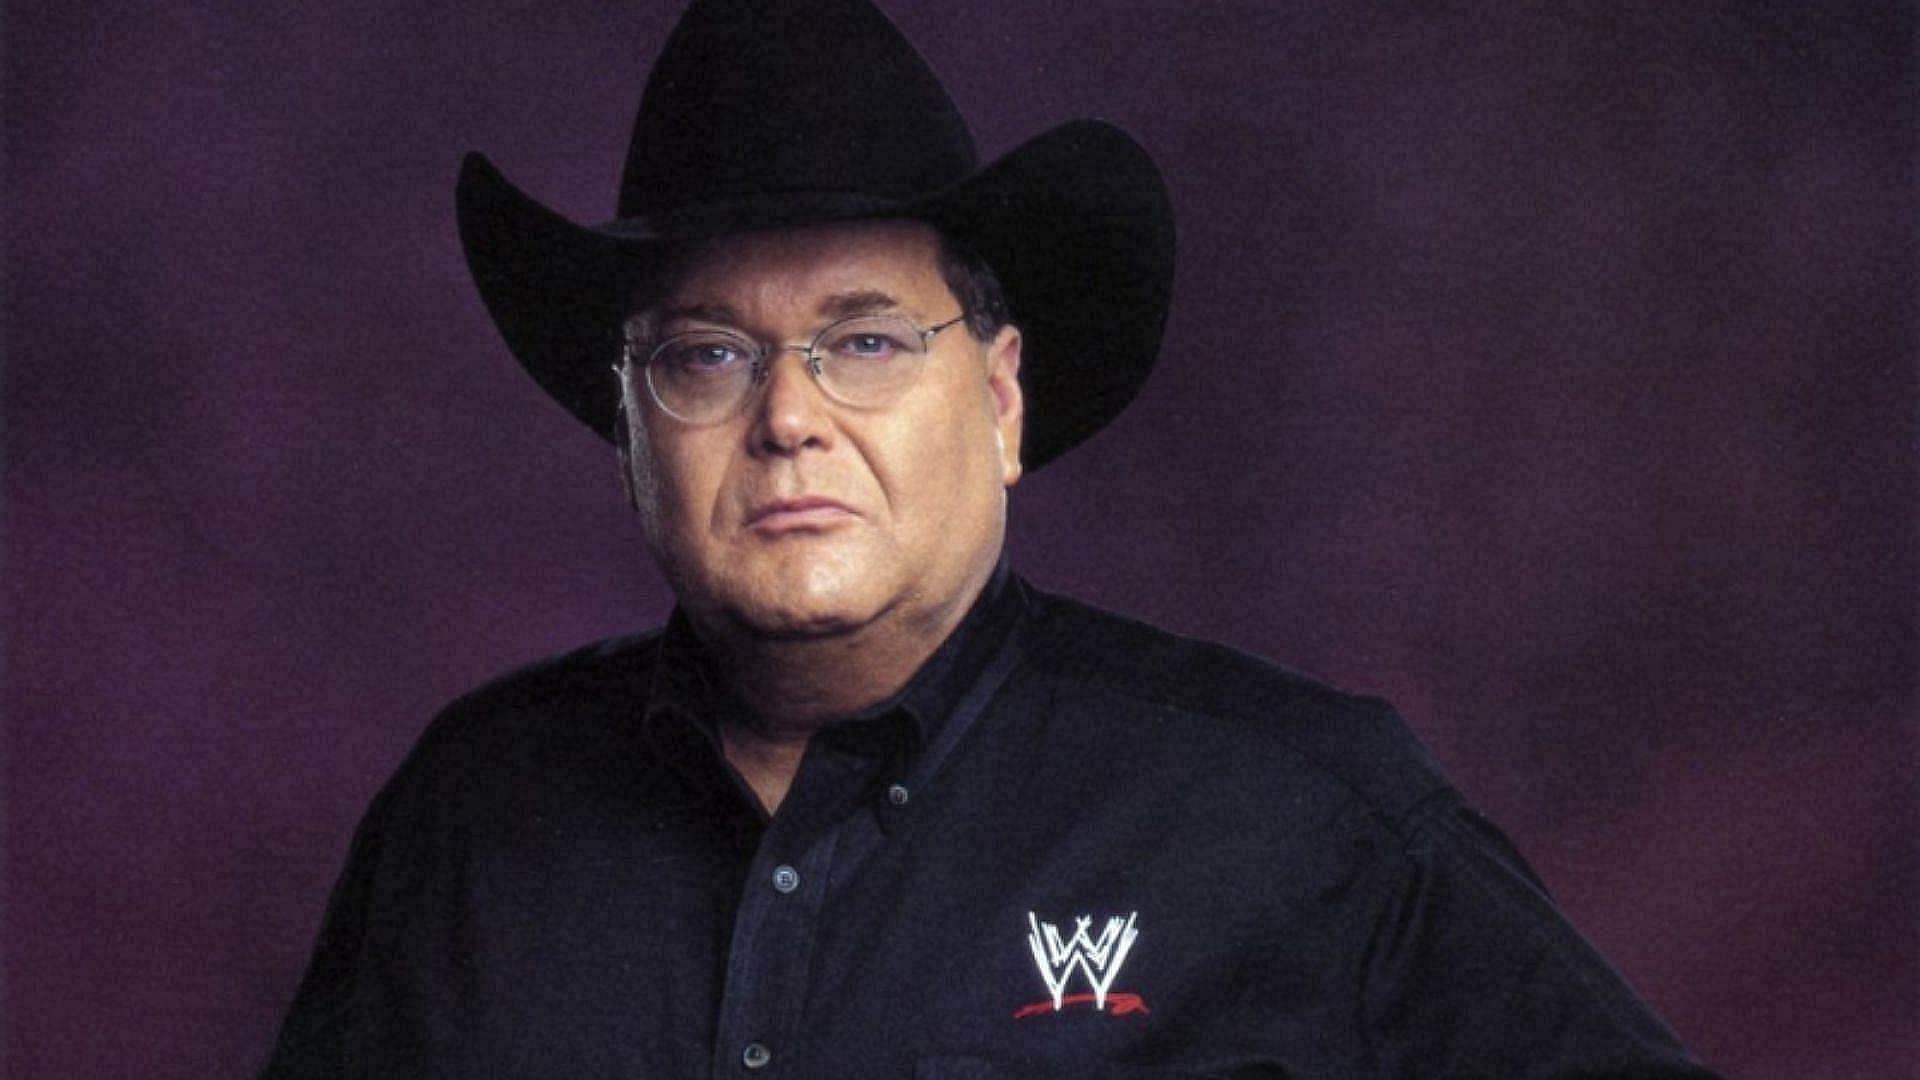 Jim Ross is widely viewed as one of the greatest announcers ever